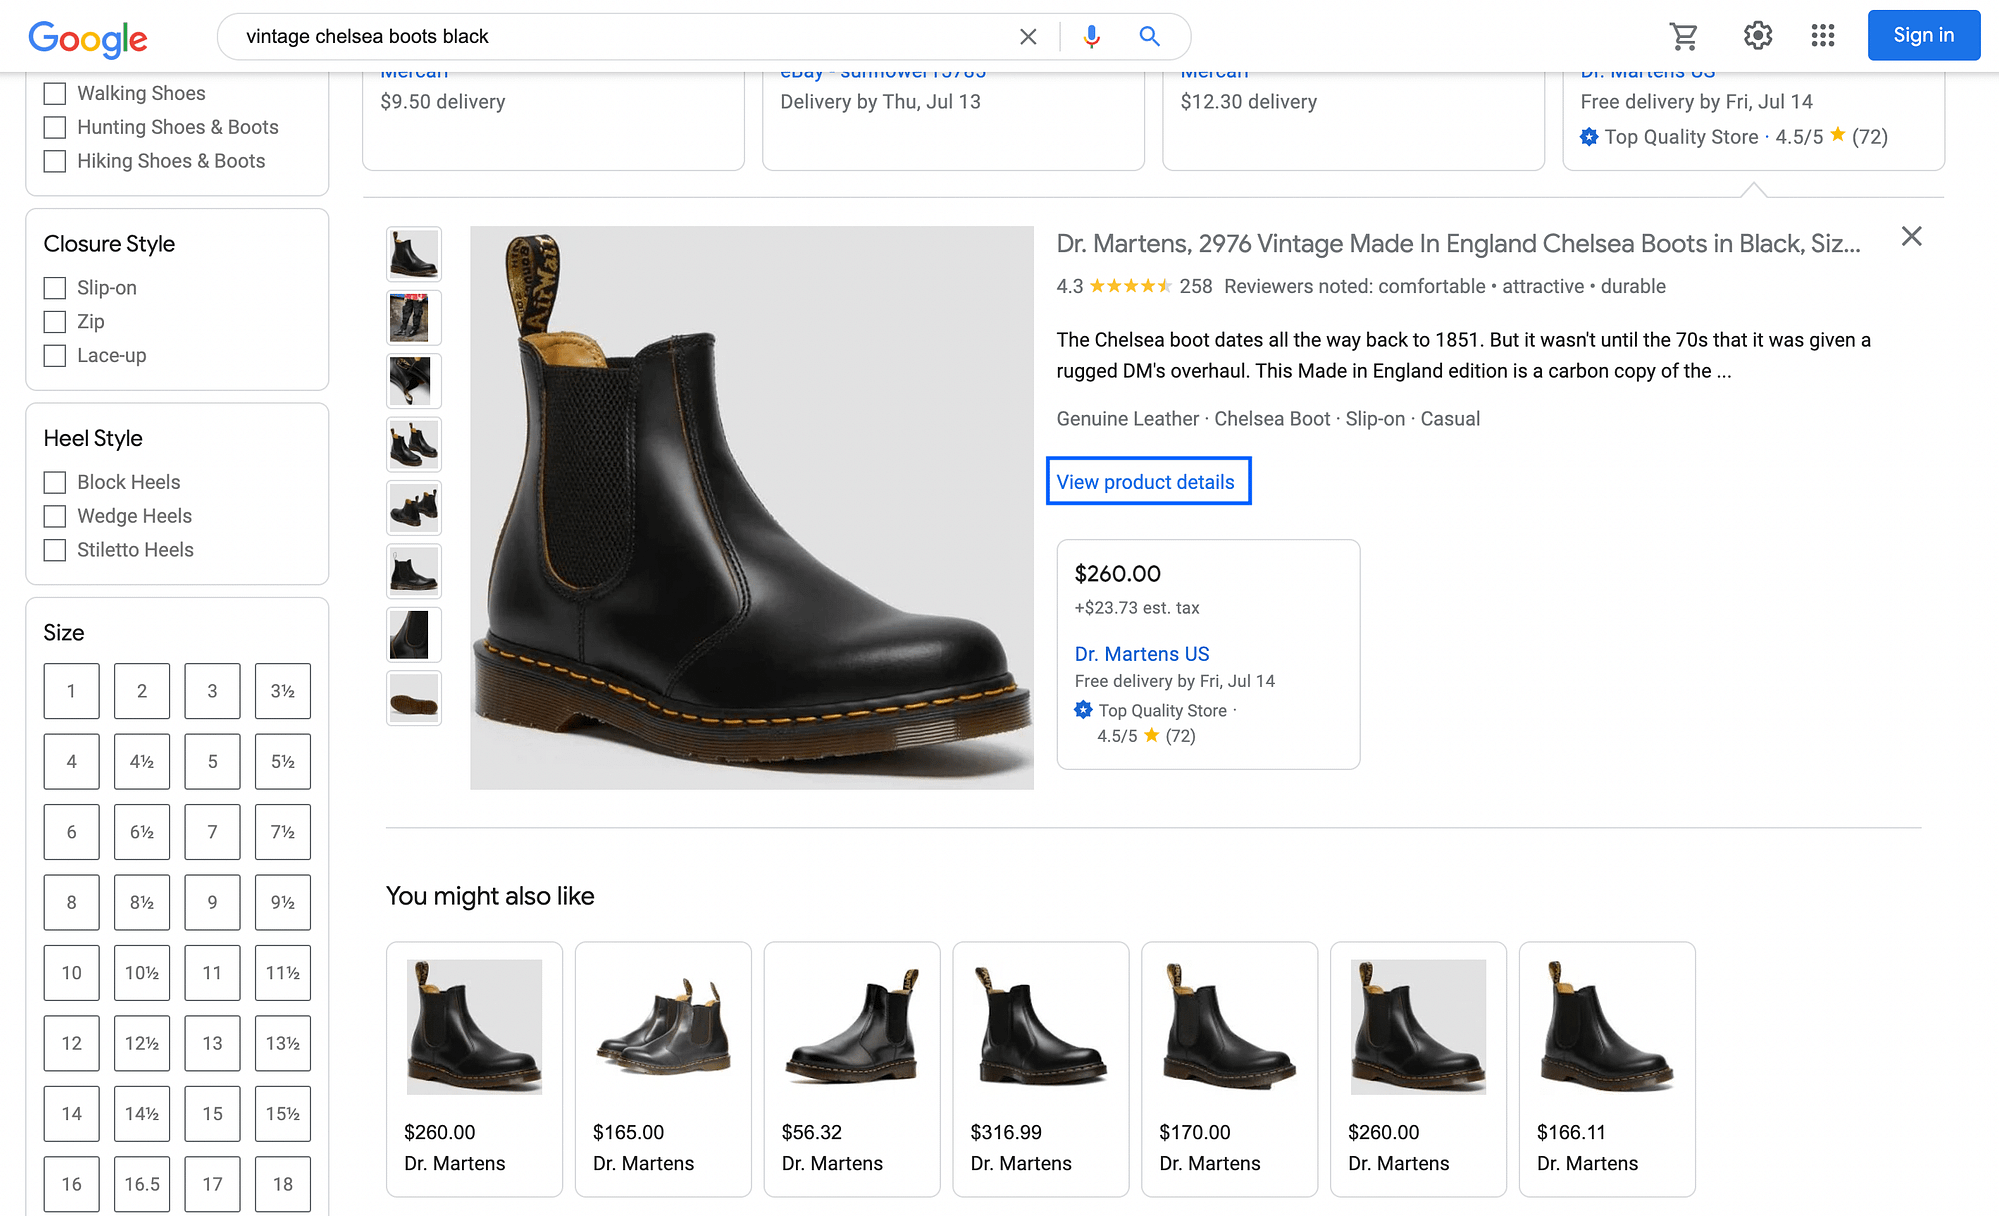 An example of a product listing summary in Google Shopping ("vintage chelsea boots black" search).